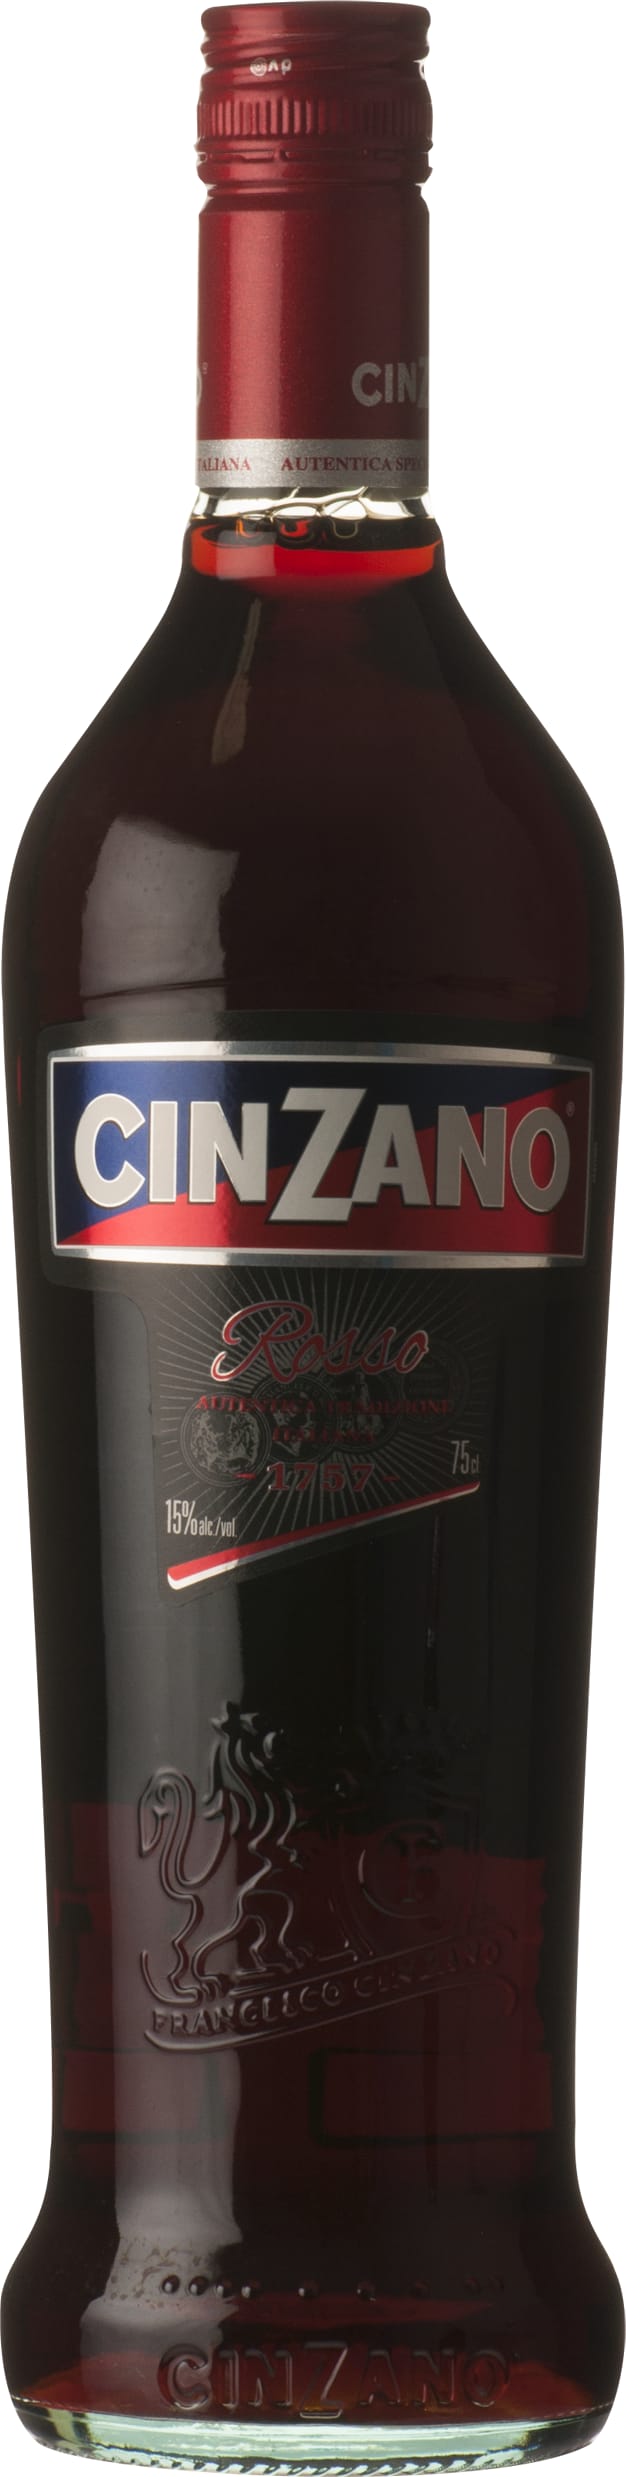 Cinzano Rosso 75cl NV - Buy Cinzano Wines from GREAT WINES DIRECT wine shop